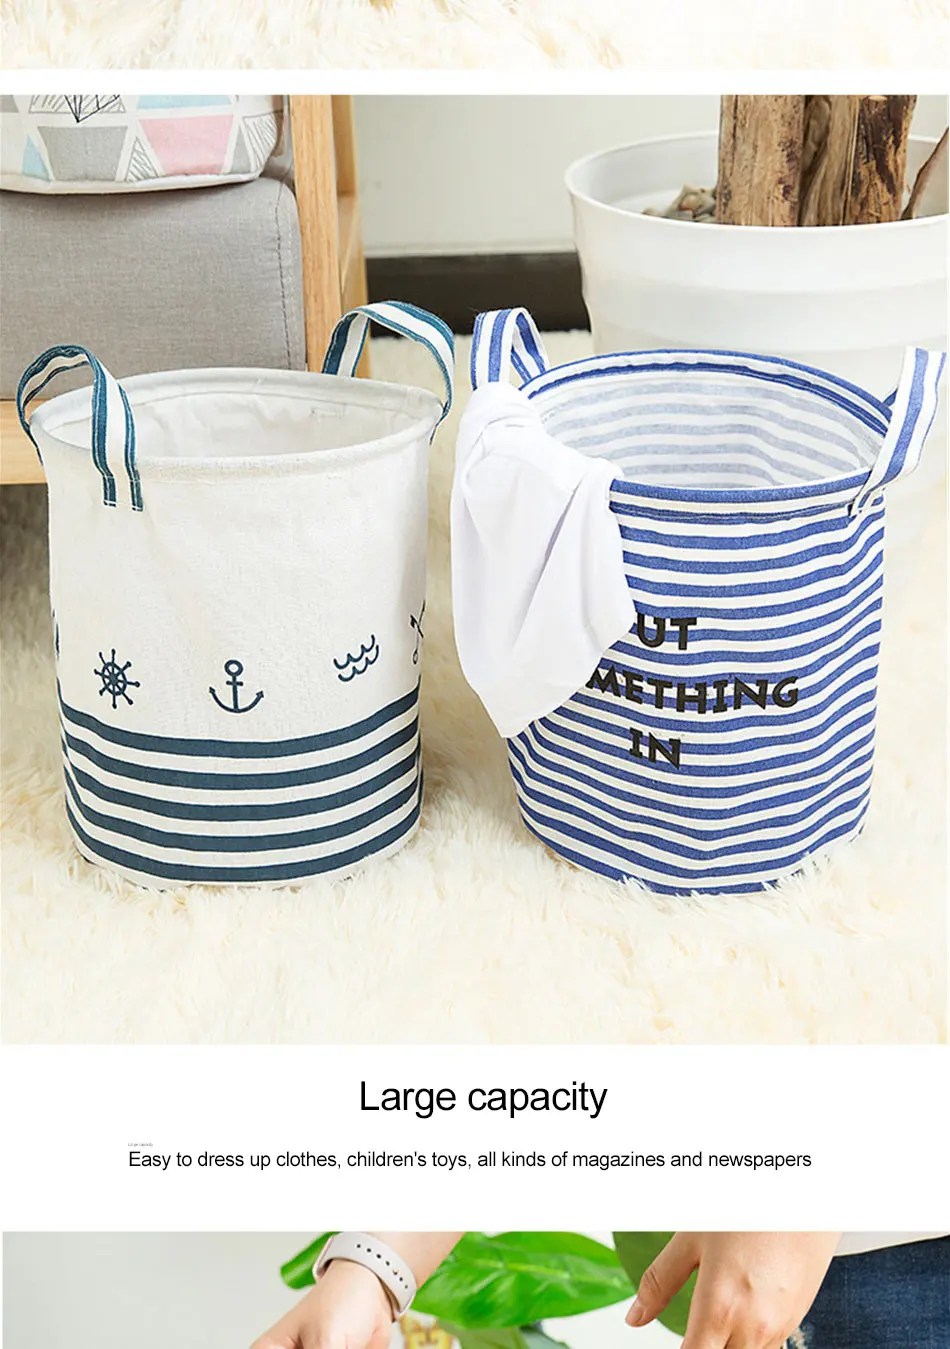 Storage Baskets Folding Laundry Basket Yellow Arrow Couple Linen Washing Clothes Barrel Bags With Handles Kids Toys Hamper Bag (5)